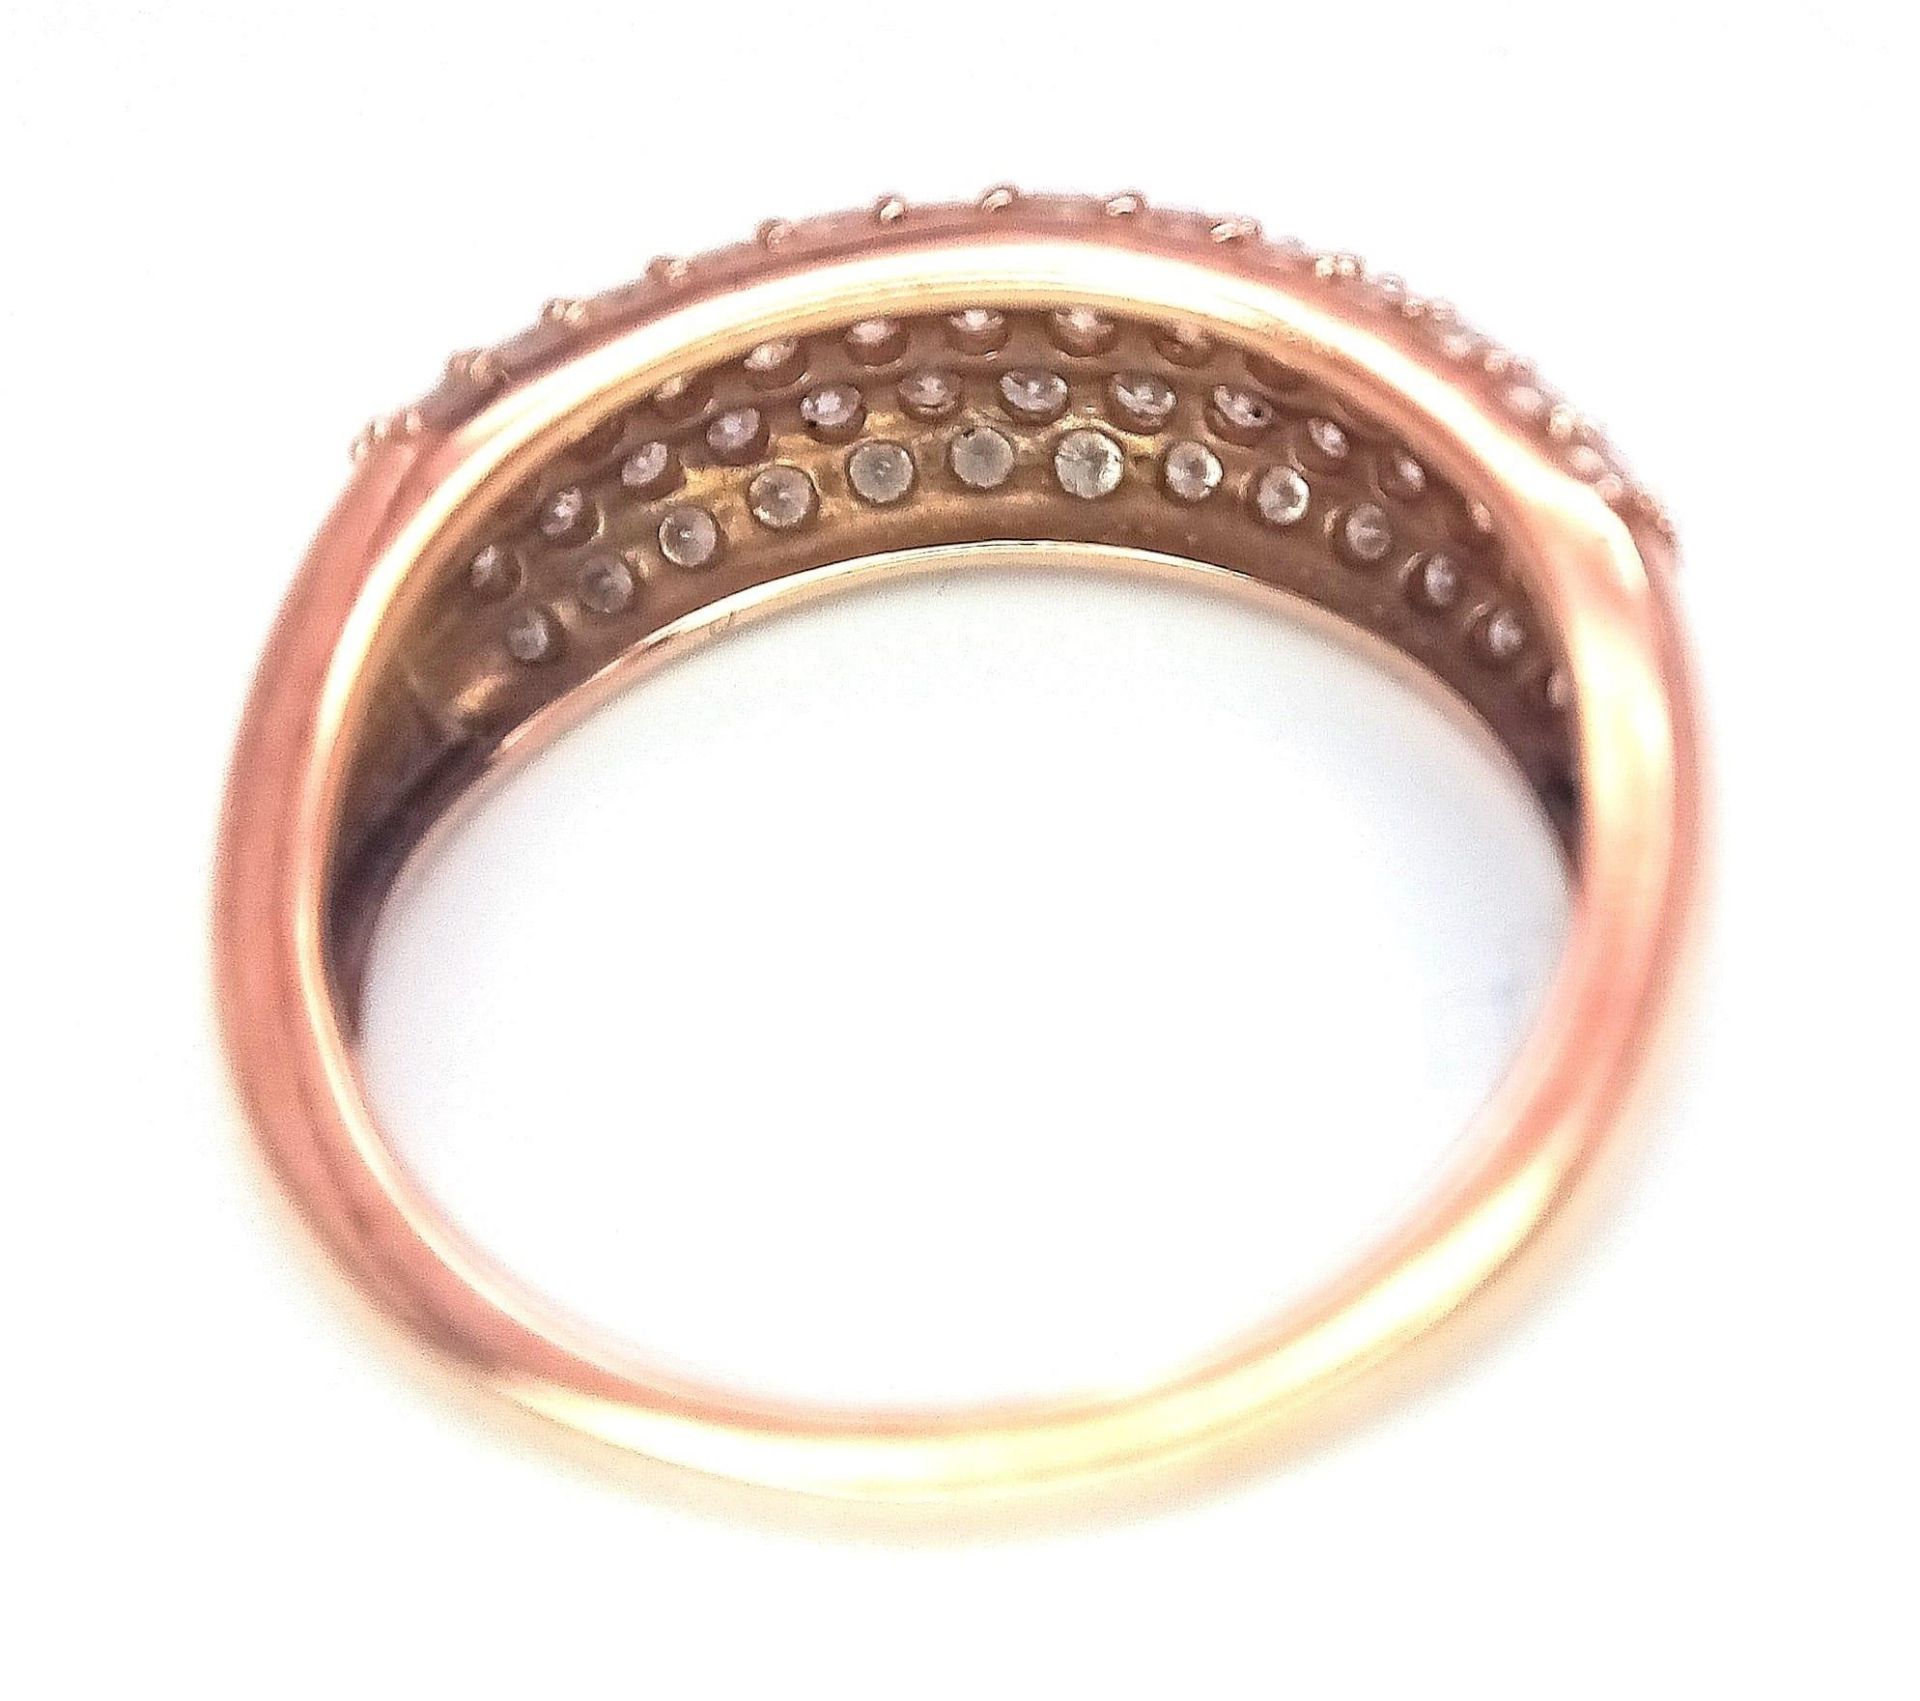 A 9K Rose Gold Diamond Encrusted Ring. Five rows of 70 small cut round diamonds. Size N. 3.2g - Bild 4 aus 6